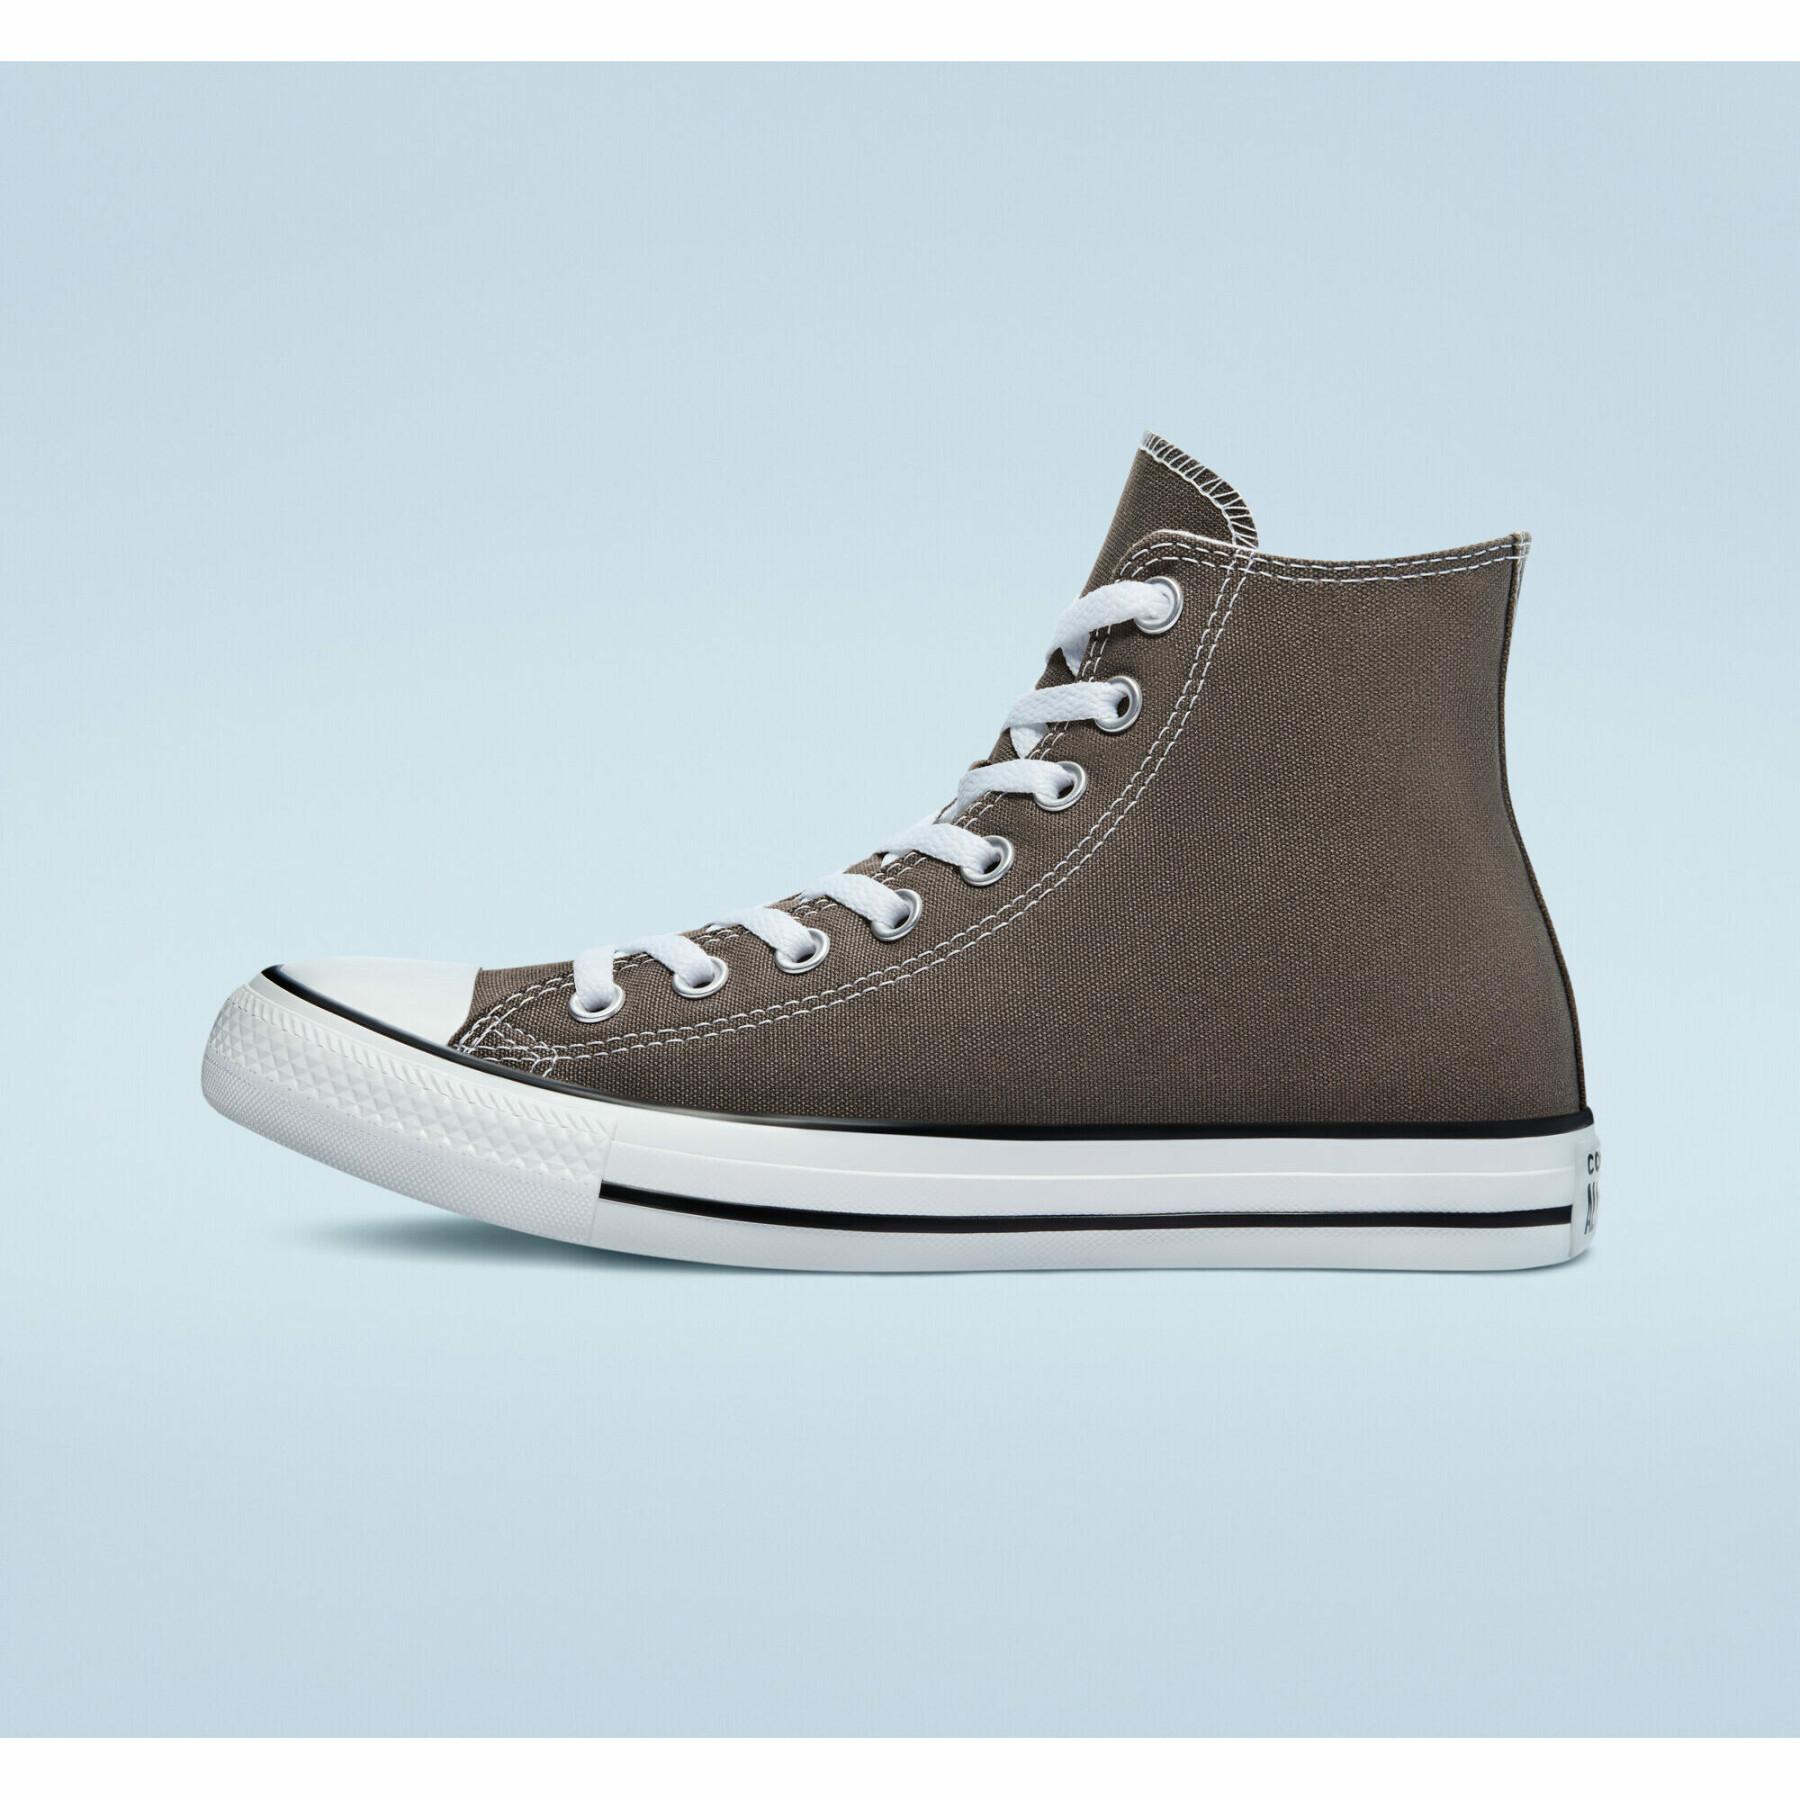 Sneakers Converse Chuck Taylor All Star